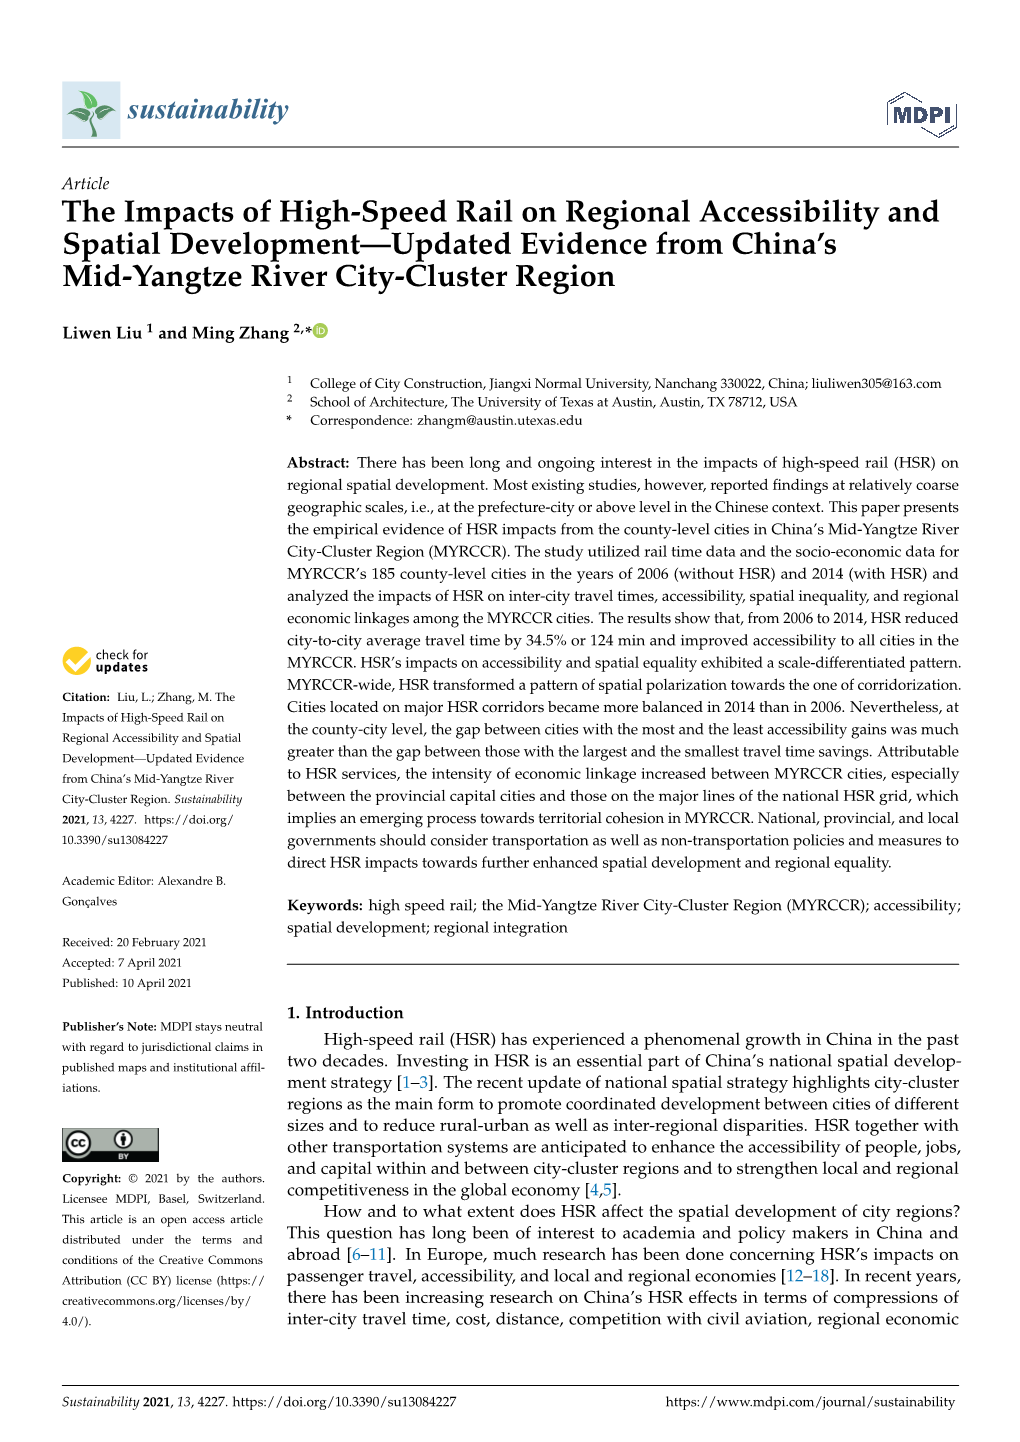 The Impacts of High-Speed Rail on Regional Accessibility and Spatial Development—Updated Evidence from China’S Mid-Yangtze River City-Cluster Region